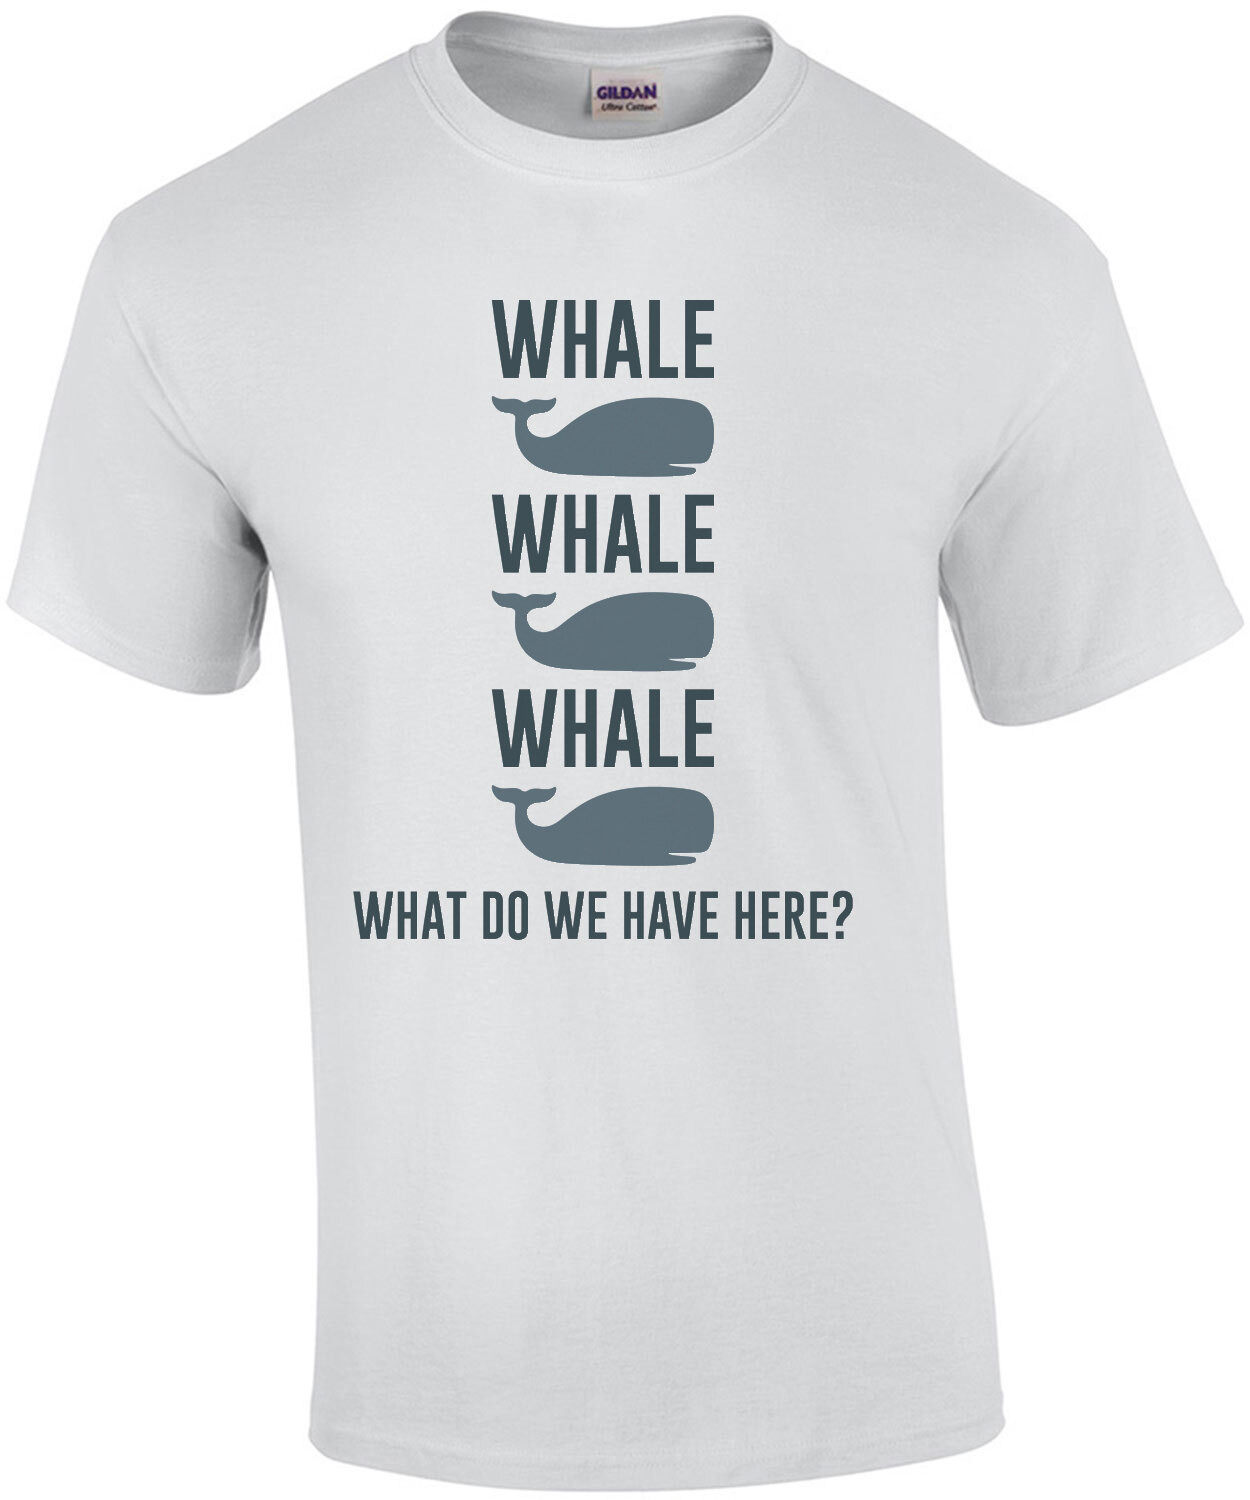 Whale Whale Whale - What do we have here - funny pun t-shirt